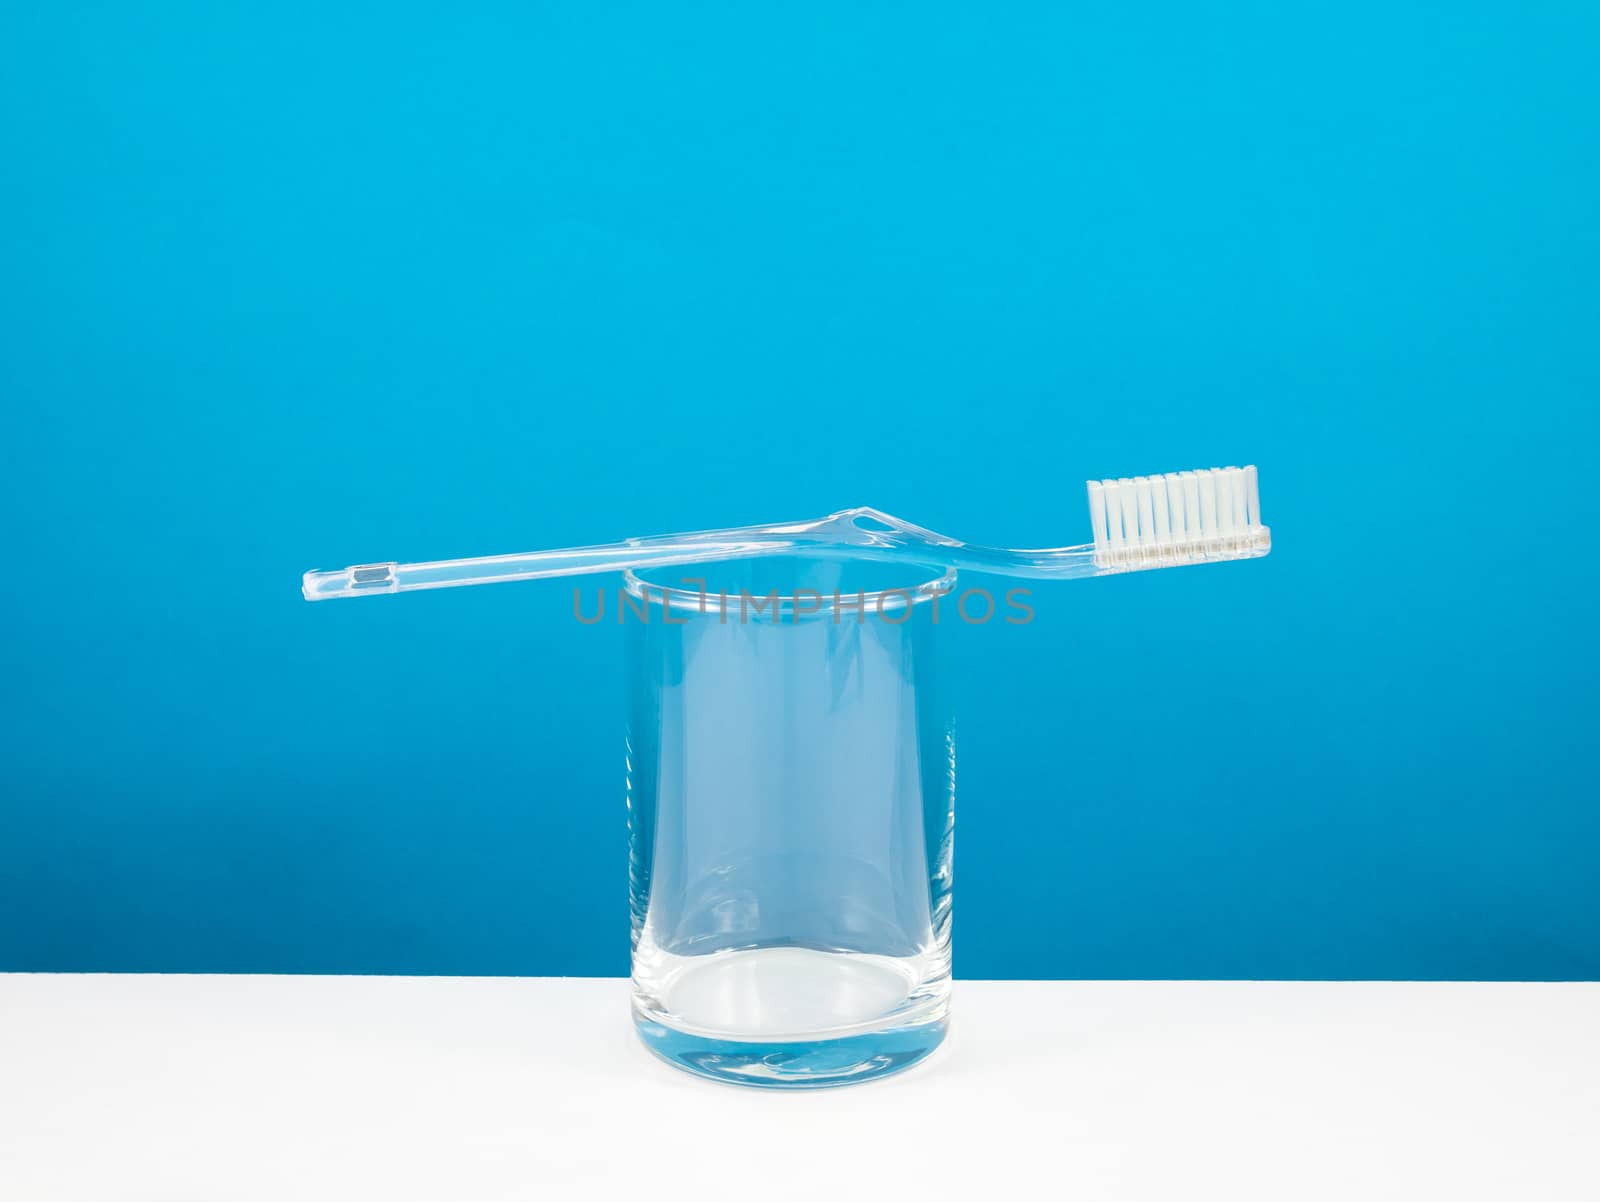 The clear toothbrush with small glass by phasuthorn